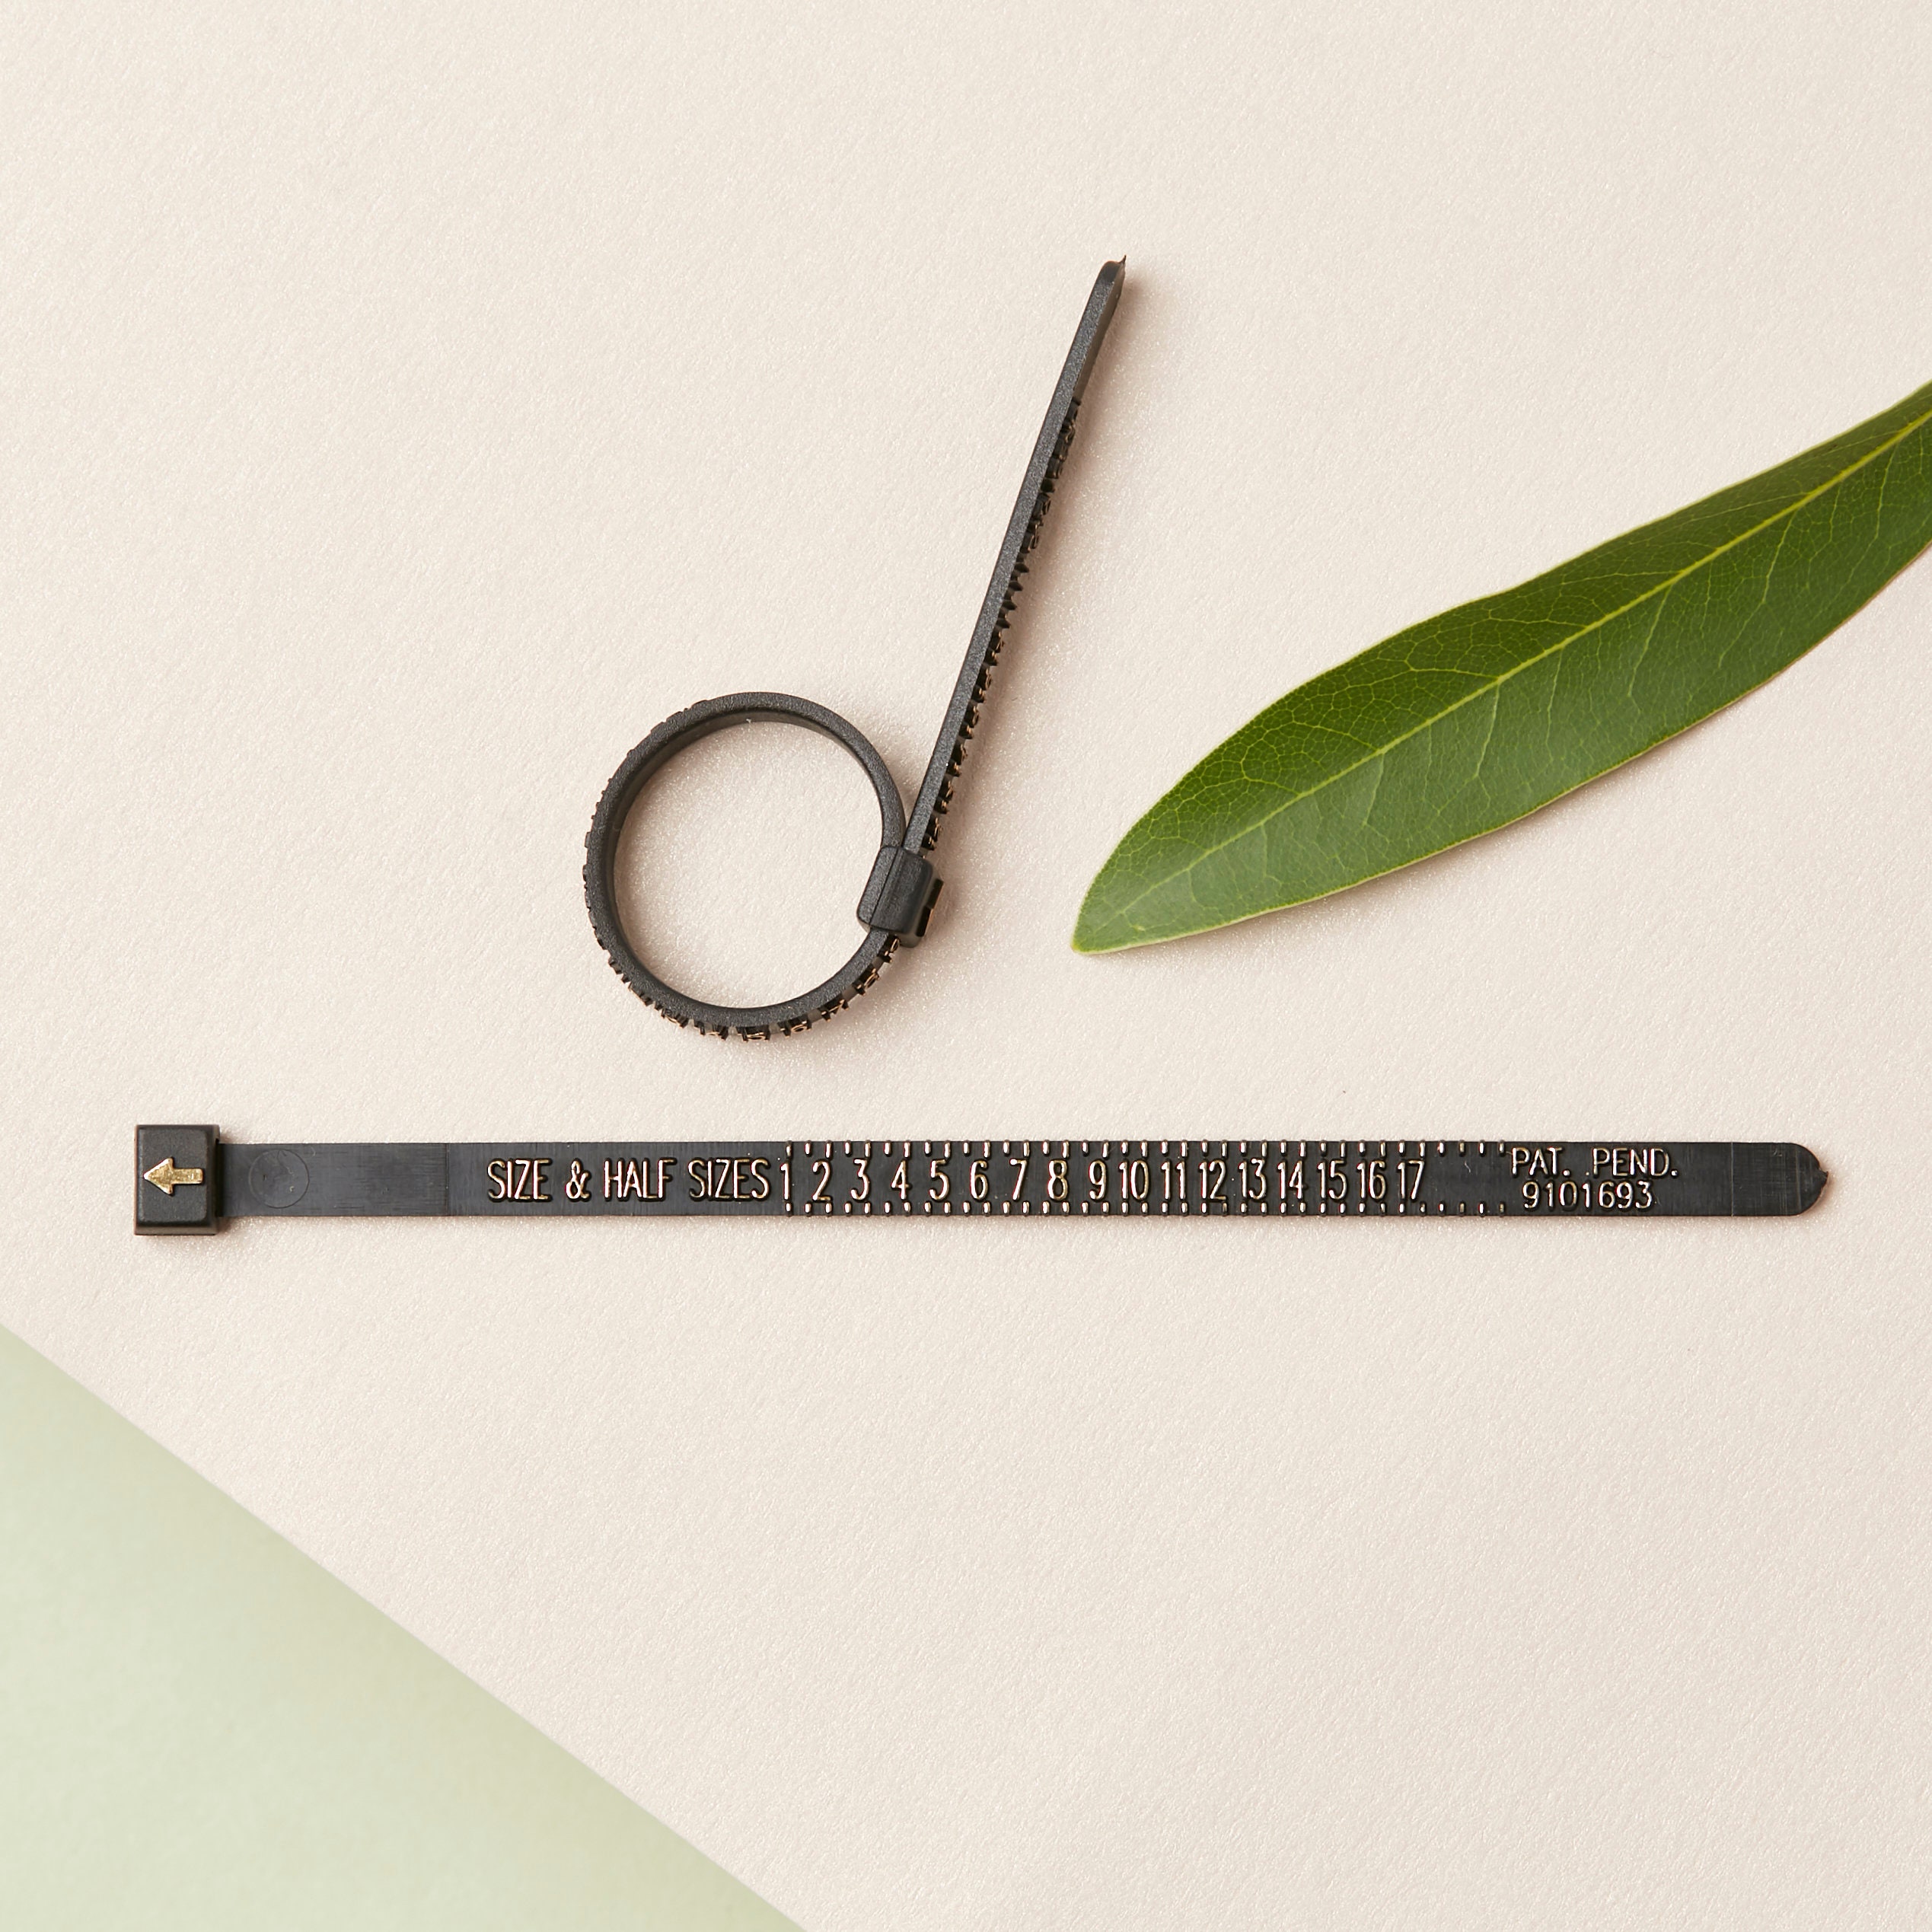 How to Measure Ring Size With Tape Measure – Leyloon Jewelry